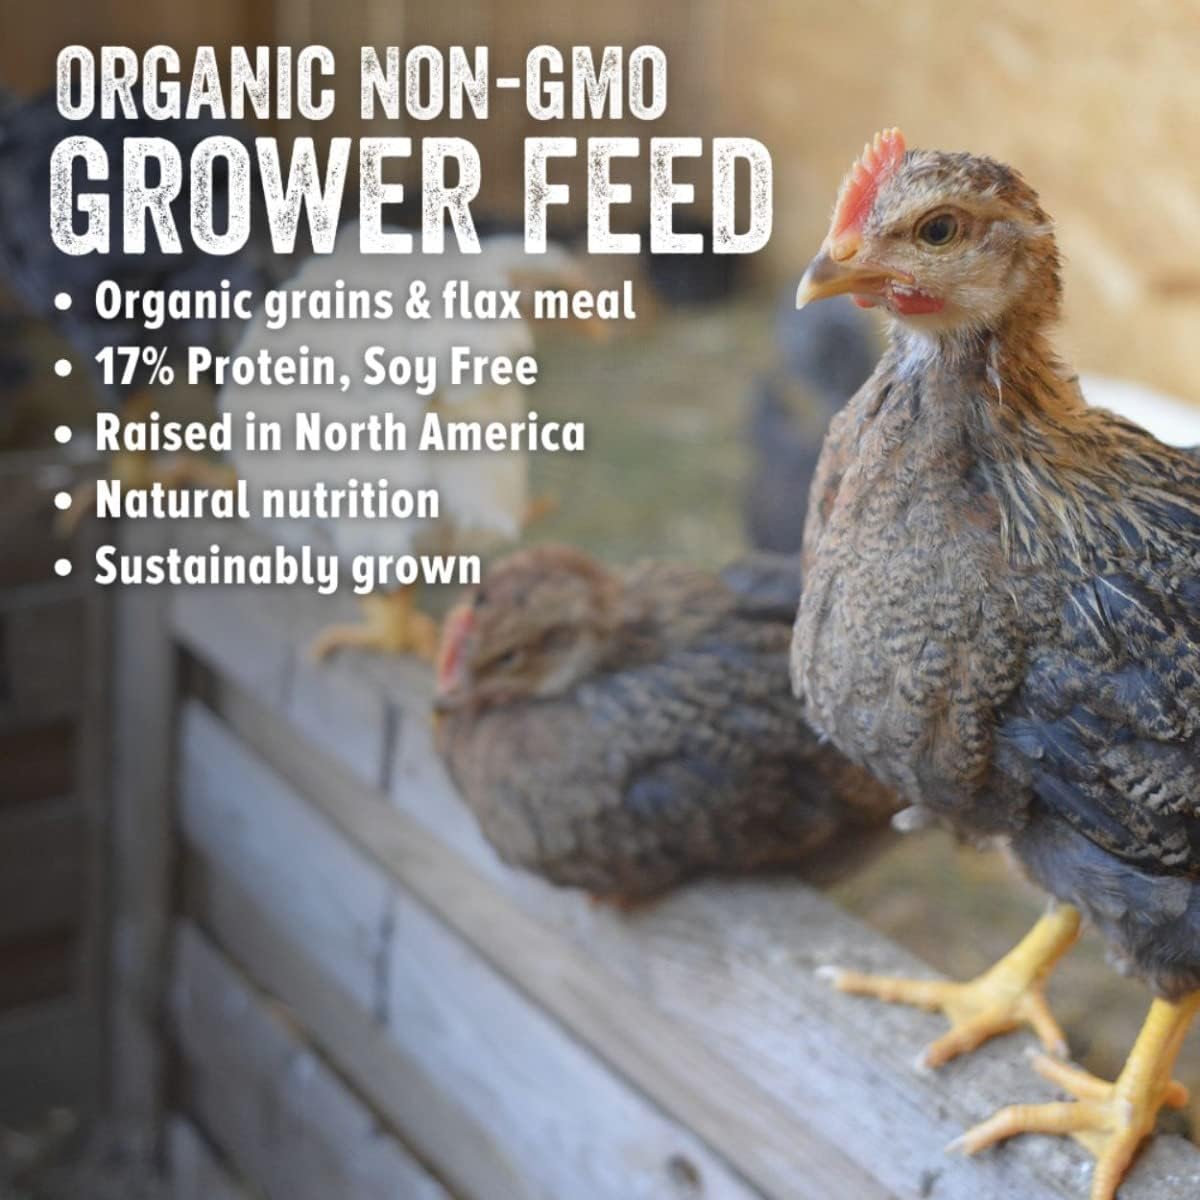 Scratch and Peck Feeds Organic Grower Mash Chicken Feed - 10-lbs - 17% Protein, Non-GMO Project Verified, Naturally Free Chicken Food